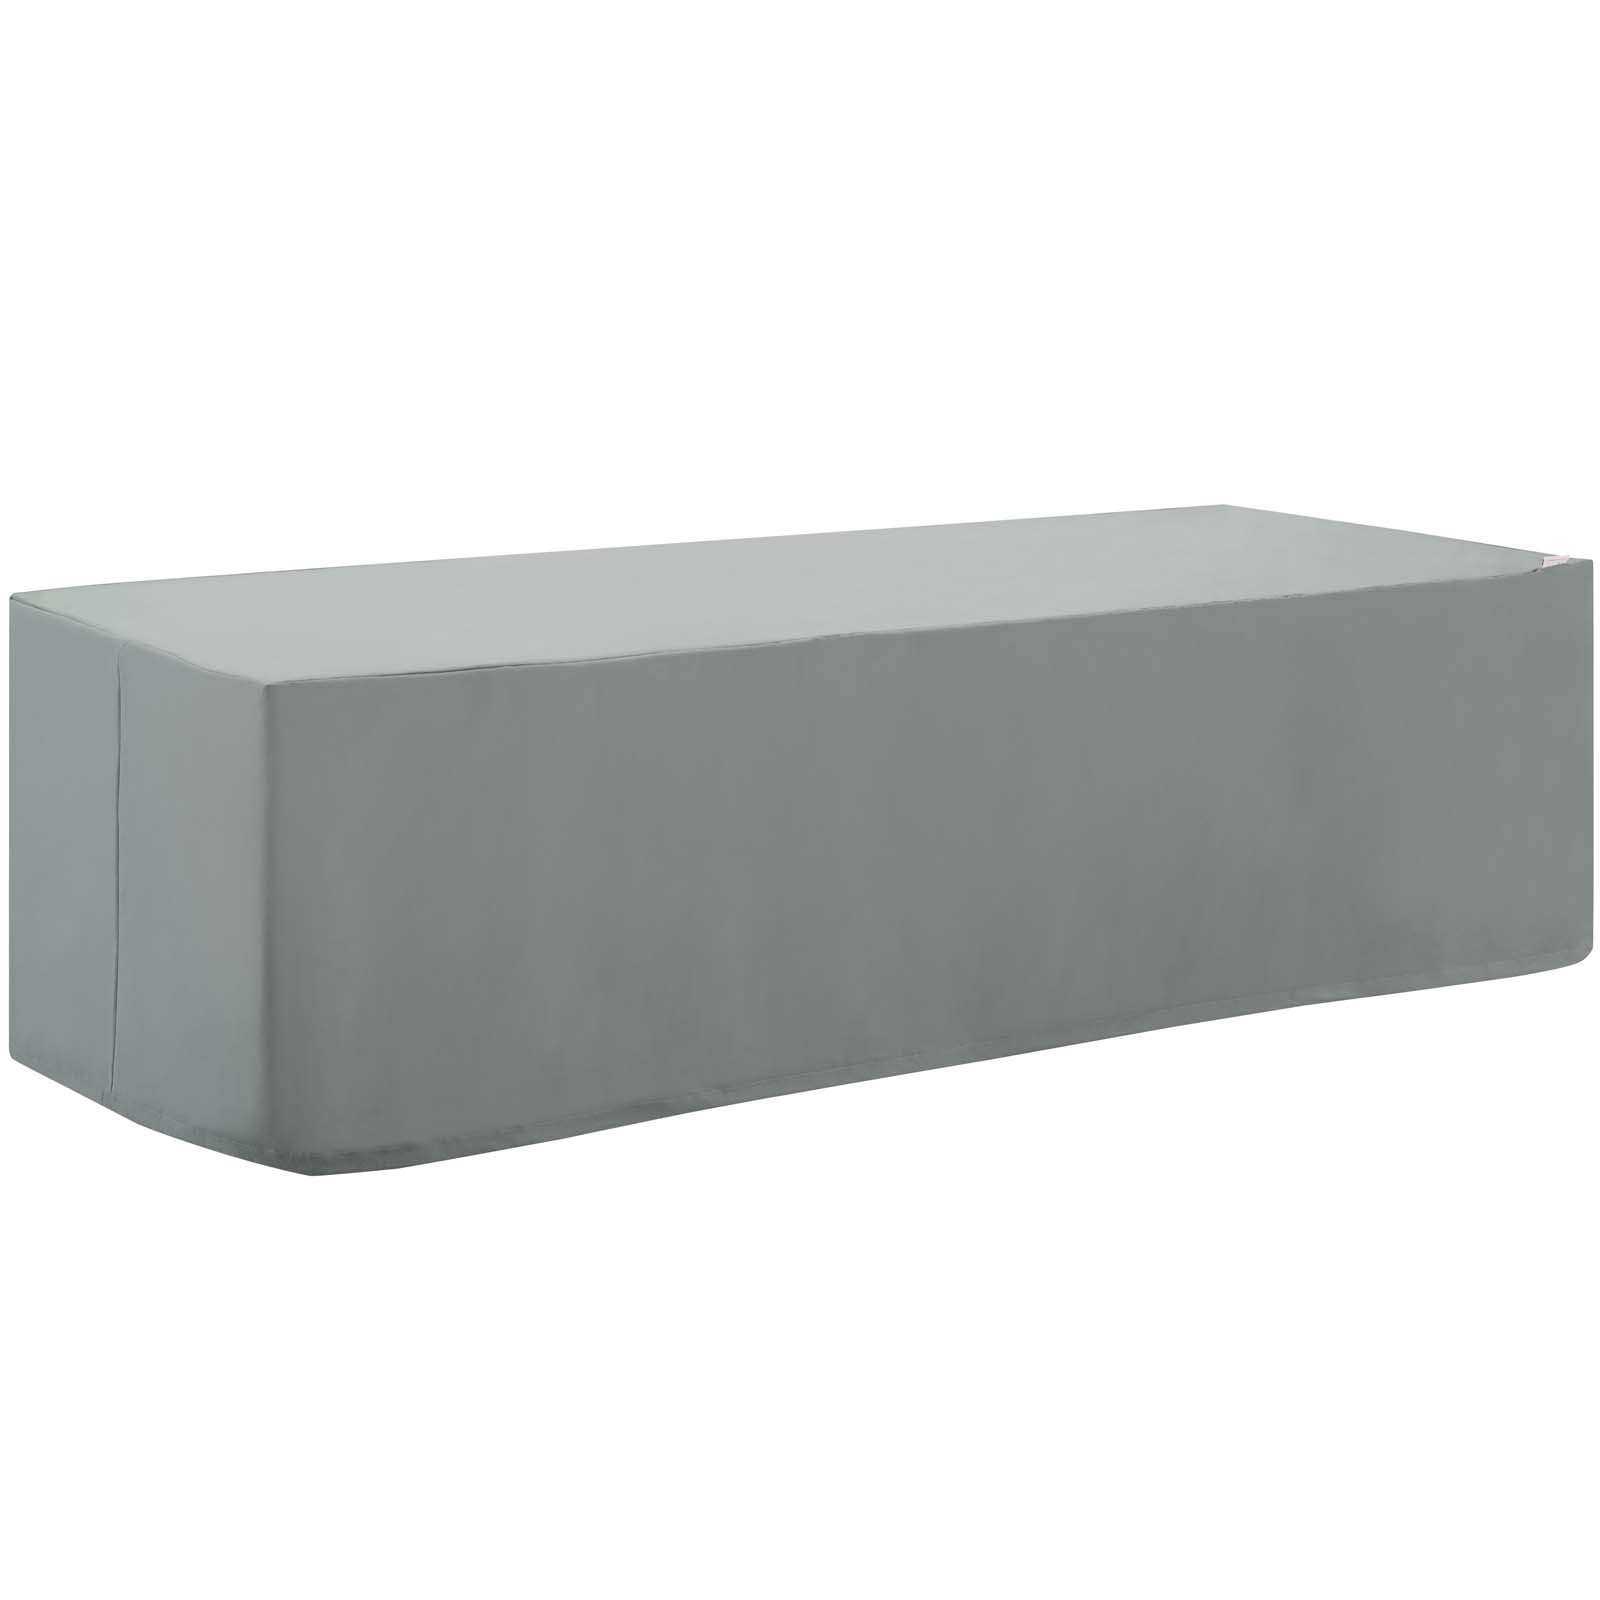 Immerse Convene/Sojourn/Summon Chaise or Sofa Outdoor Patio Furniture Cover in Gray